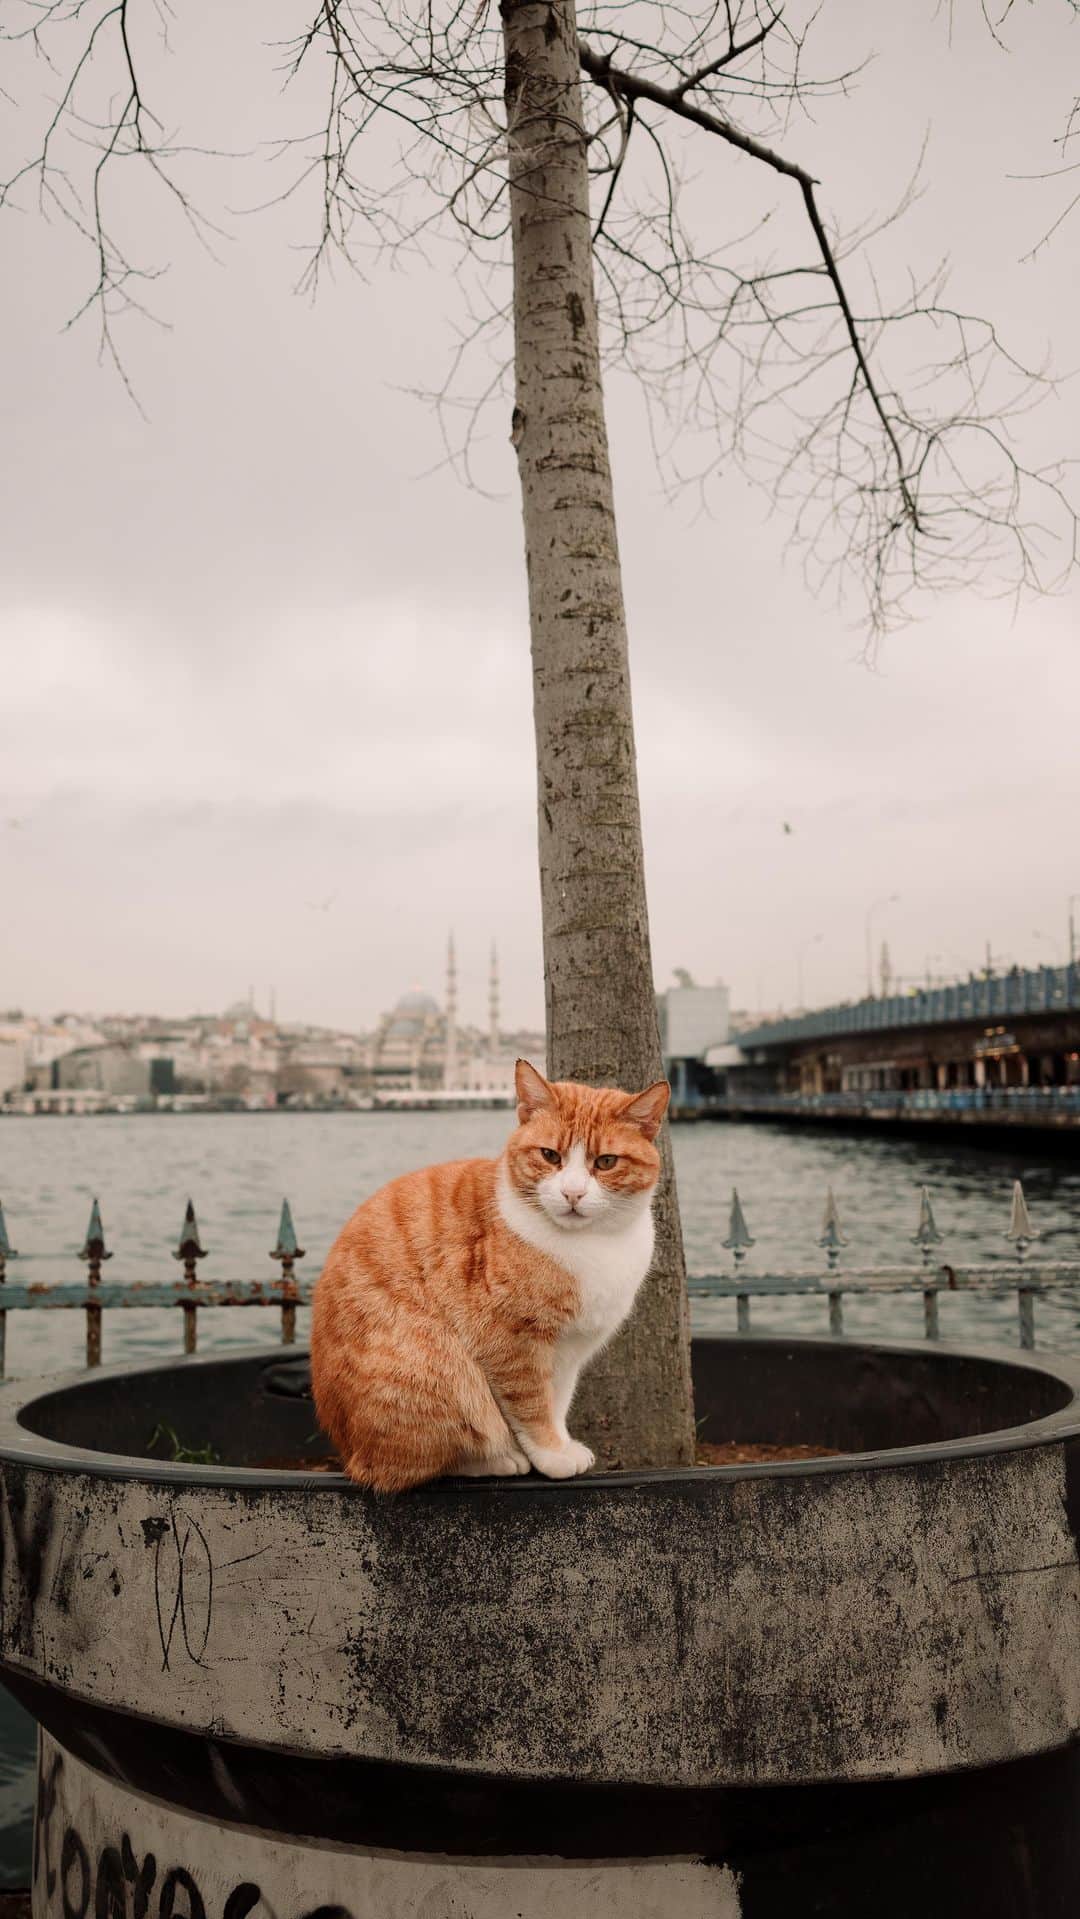 Putri Anindyaのインスタグラム：「Making memories in one of my fav city, Istanbul, with Ricoh GR III. I think i’m in love with this pocket camera. It was a cloudy yet fine morning.   Edited in capcut with “scent” filter. Photos are edited in Lightroom pc Presets are mine Location : Around Galata Tower and Galata Bridge, Istanbul, Turkey.  Videos : iphone 11 1080 60fps  Thanks for lending me the Ricoh @capra311 ✨ #turkiye #istanbul #ricohgriii #ricohgr3 #streetphotography」